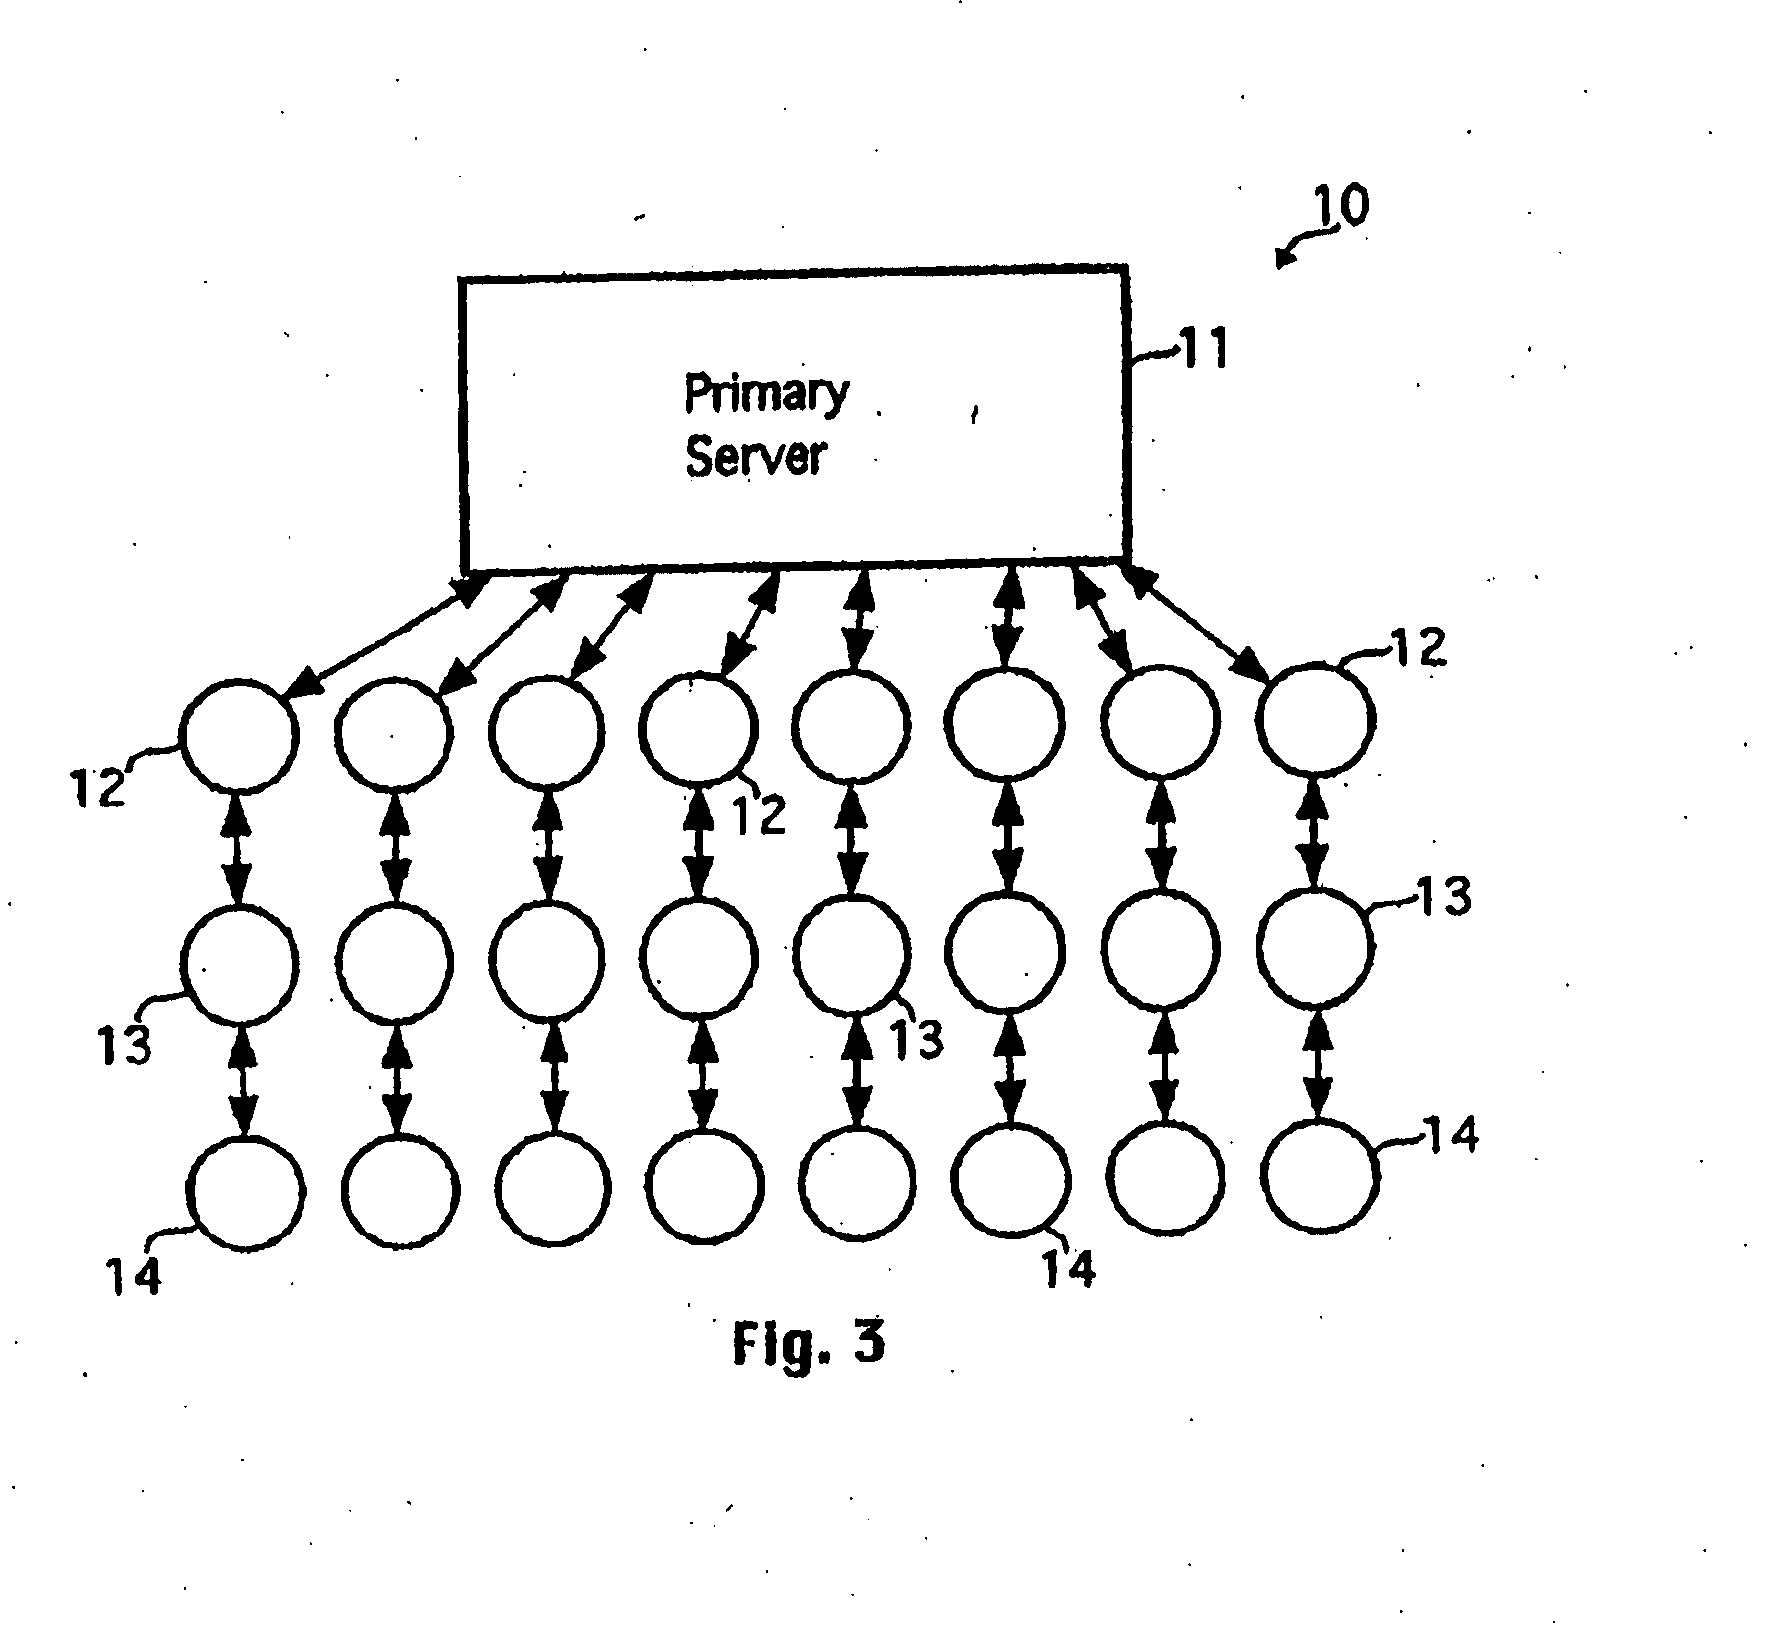 System and method for broadcasting content to nodes on computer networks